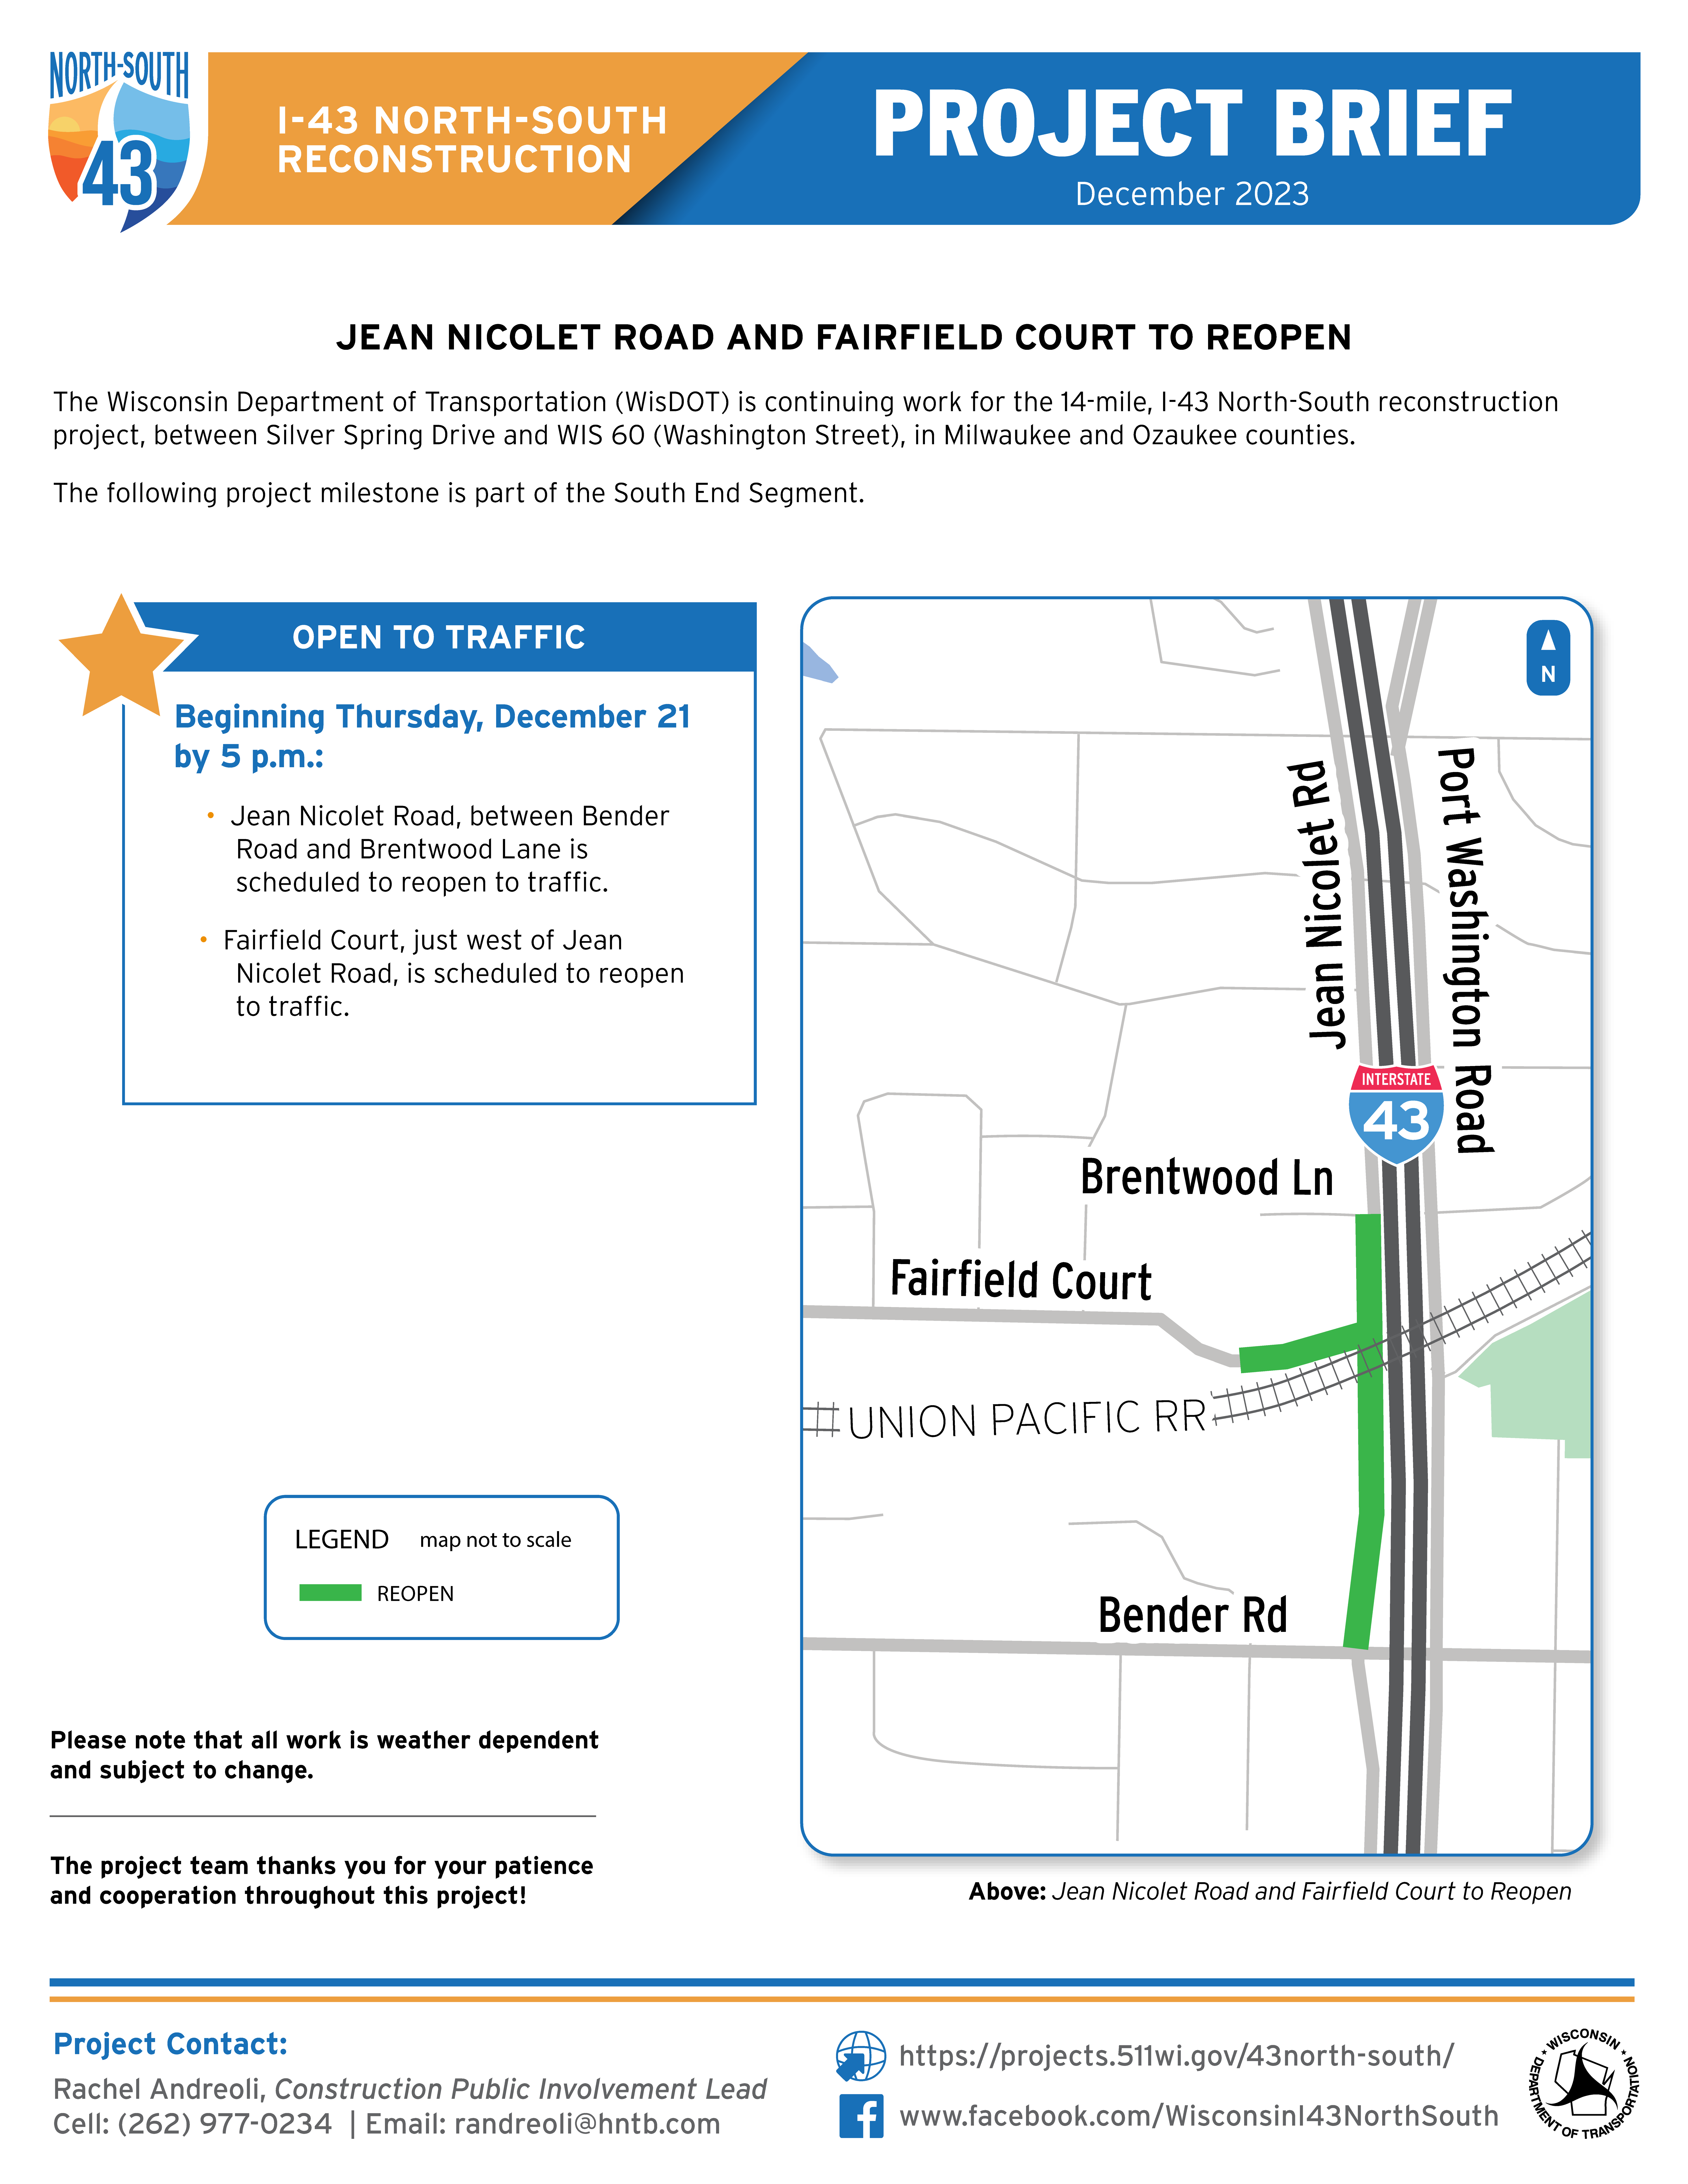 December 21, Jean Nicolet Road and Fairfield Court to Reopen